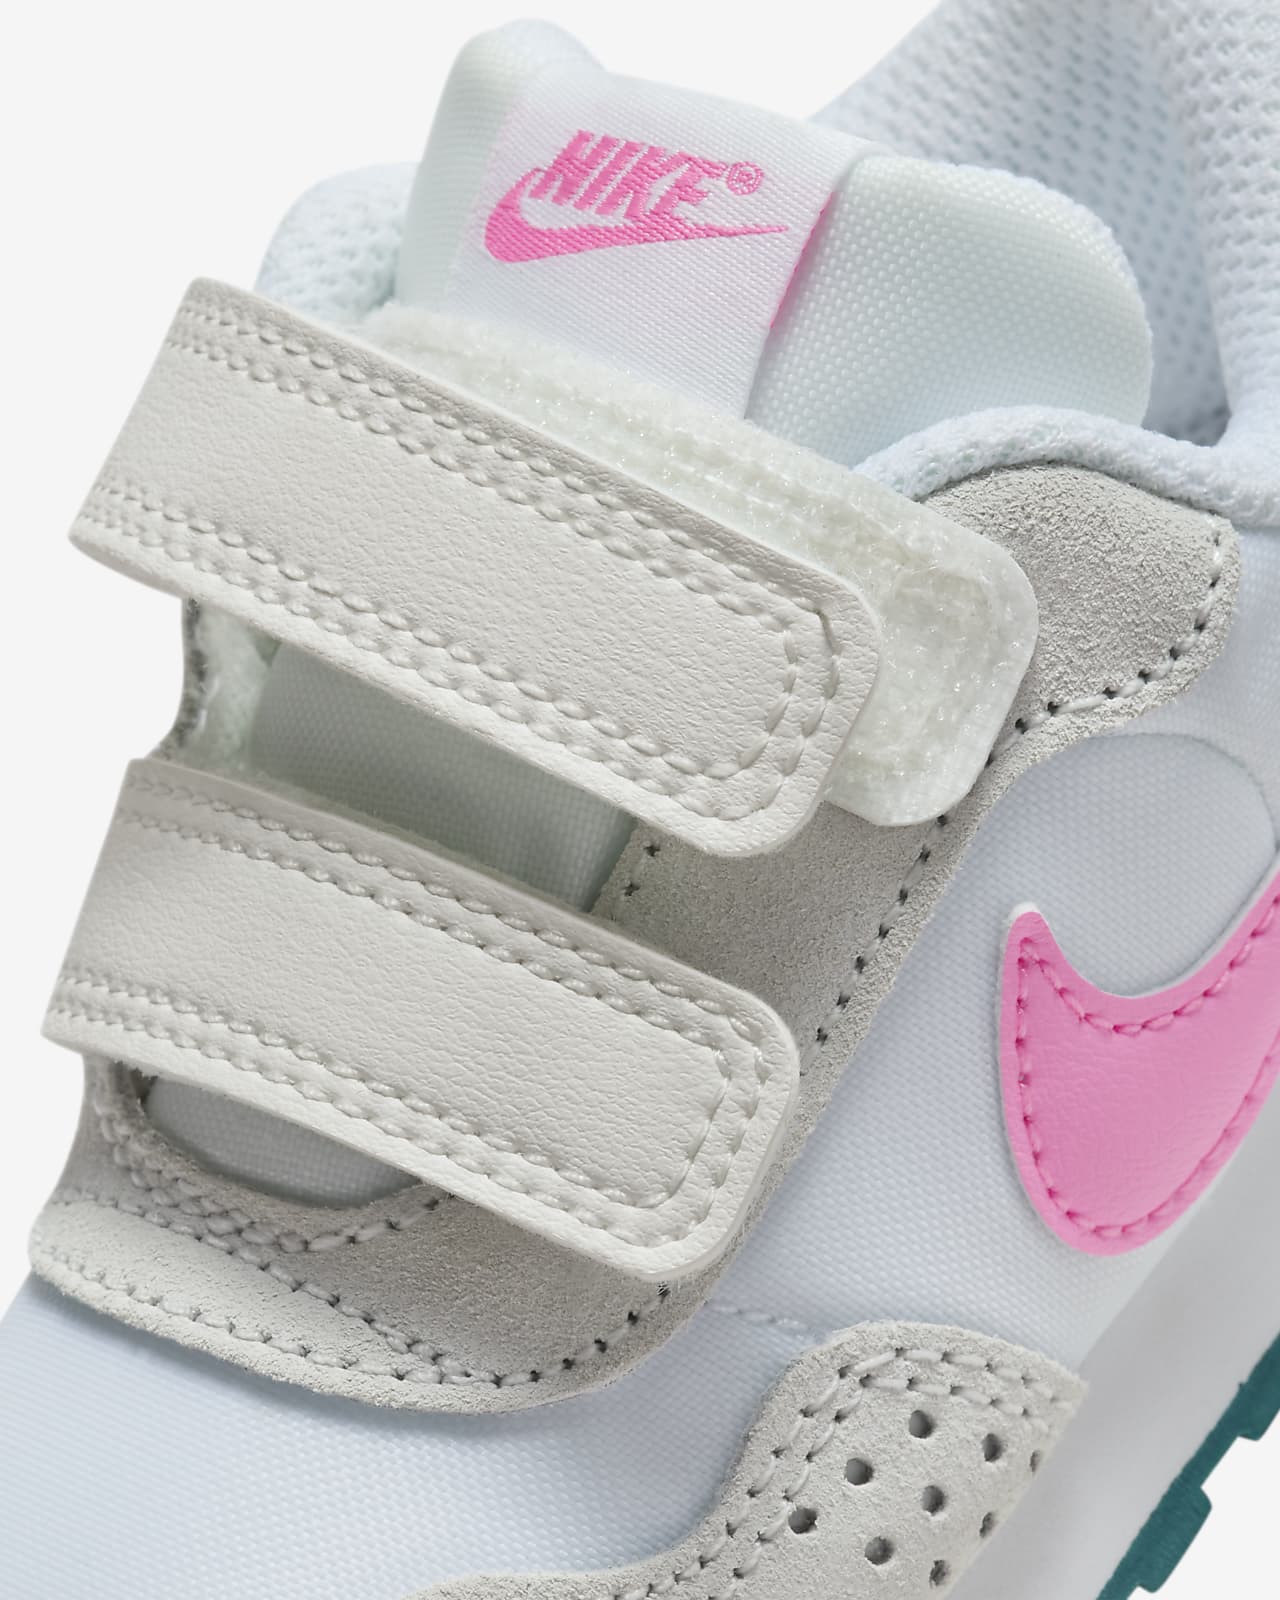 Shoes. MD Nike Valiant Baby/Toddler